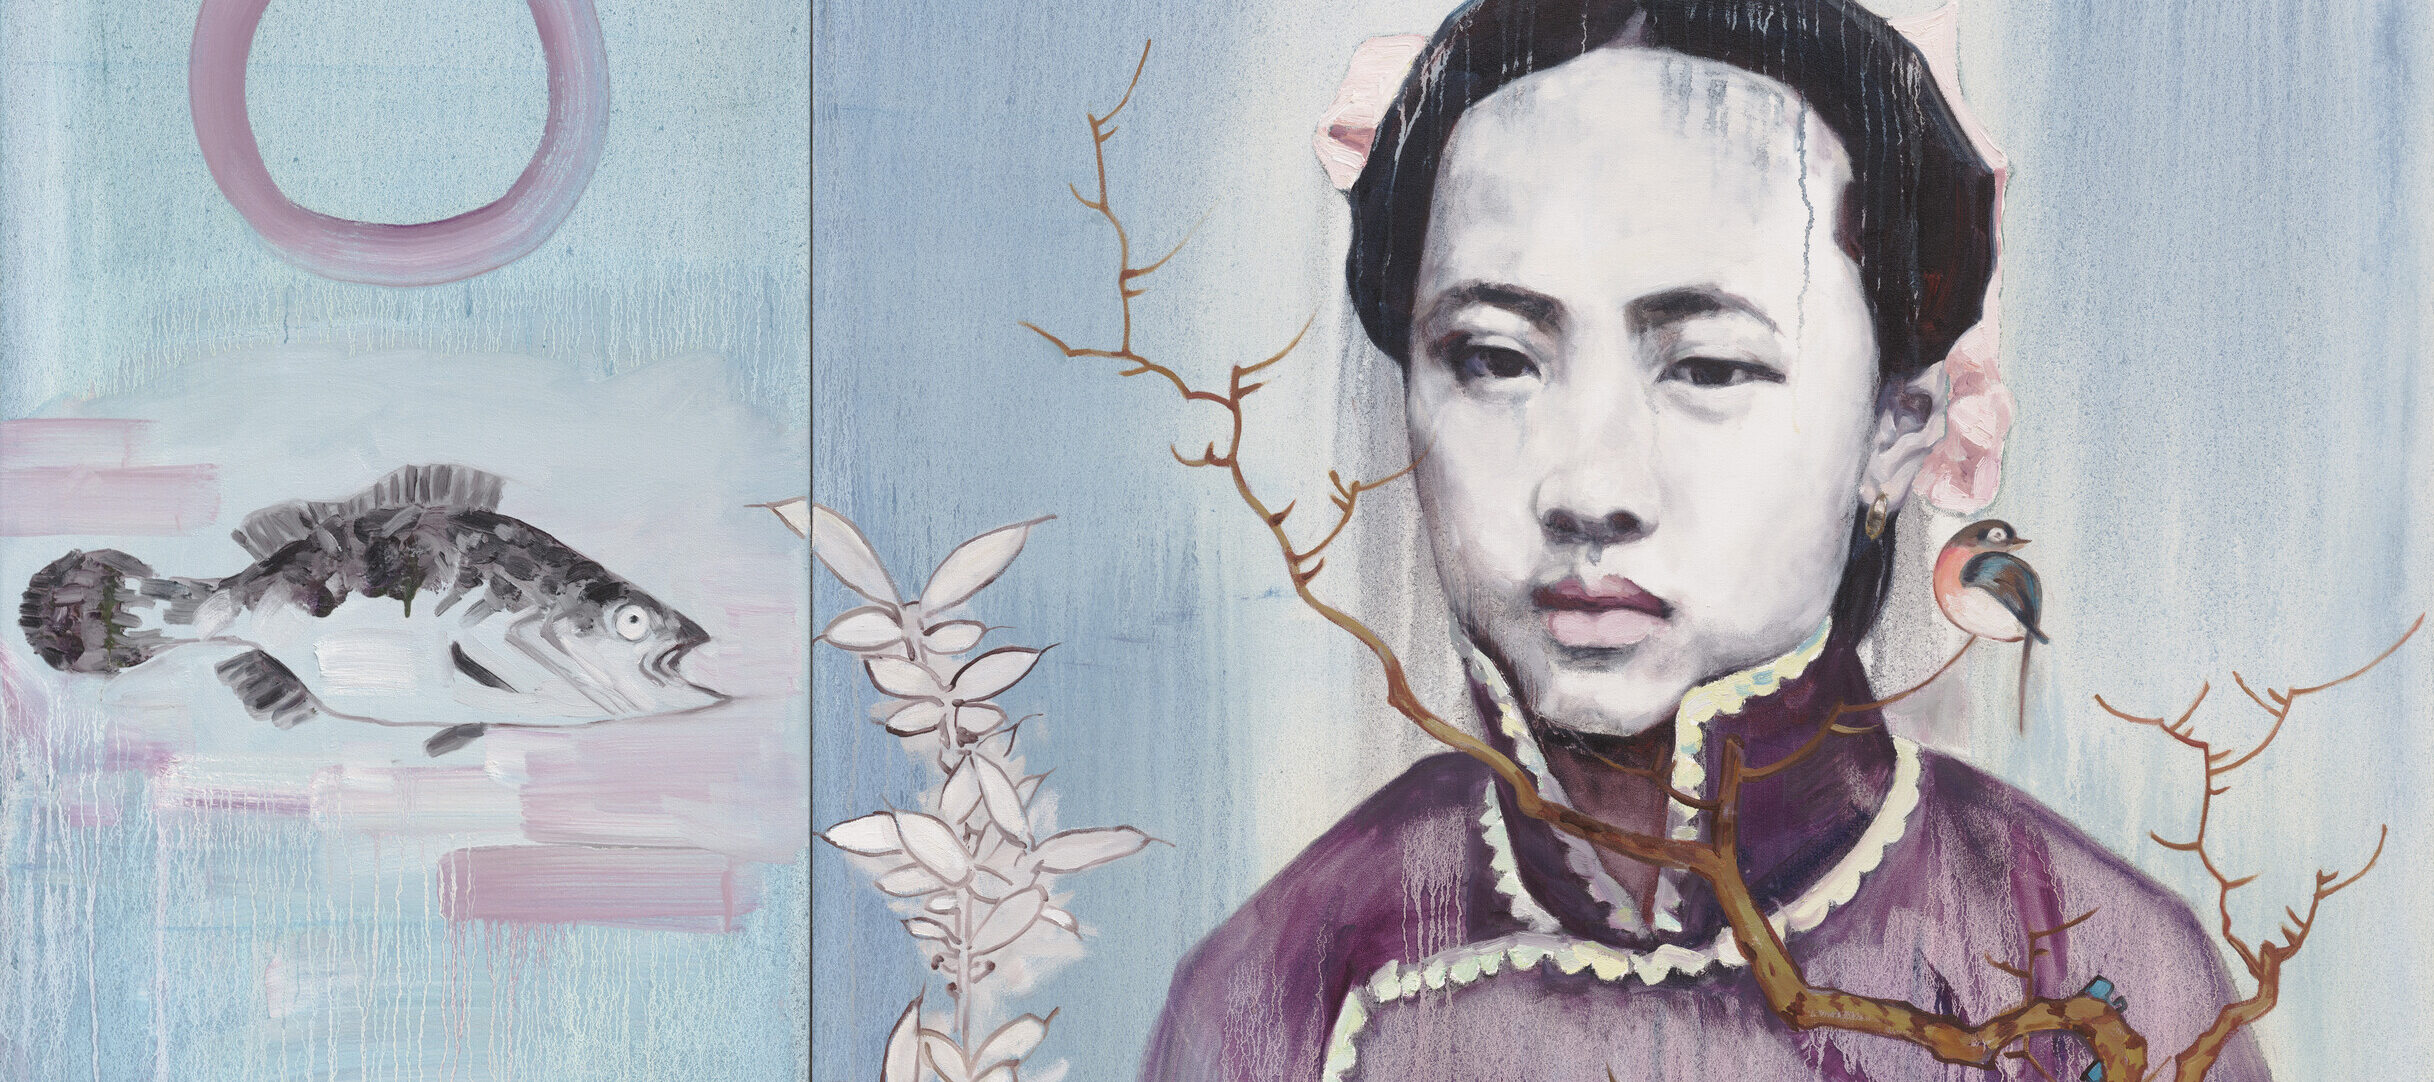 A square painting with layered, dripping textures of a Chinese woman with dark hair and a traditional dress. She gazes straightforward at the viewer. In front of her, a tree branch extends upward and a bird perches on the end of it. The background consists of two different shades of blue and on the left side of the canvas an open-mouthed fish points towards the woman.